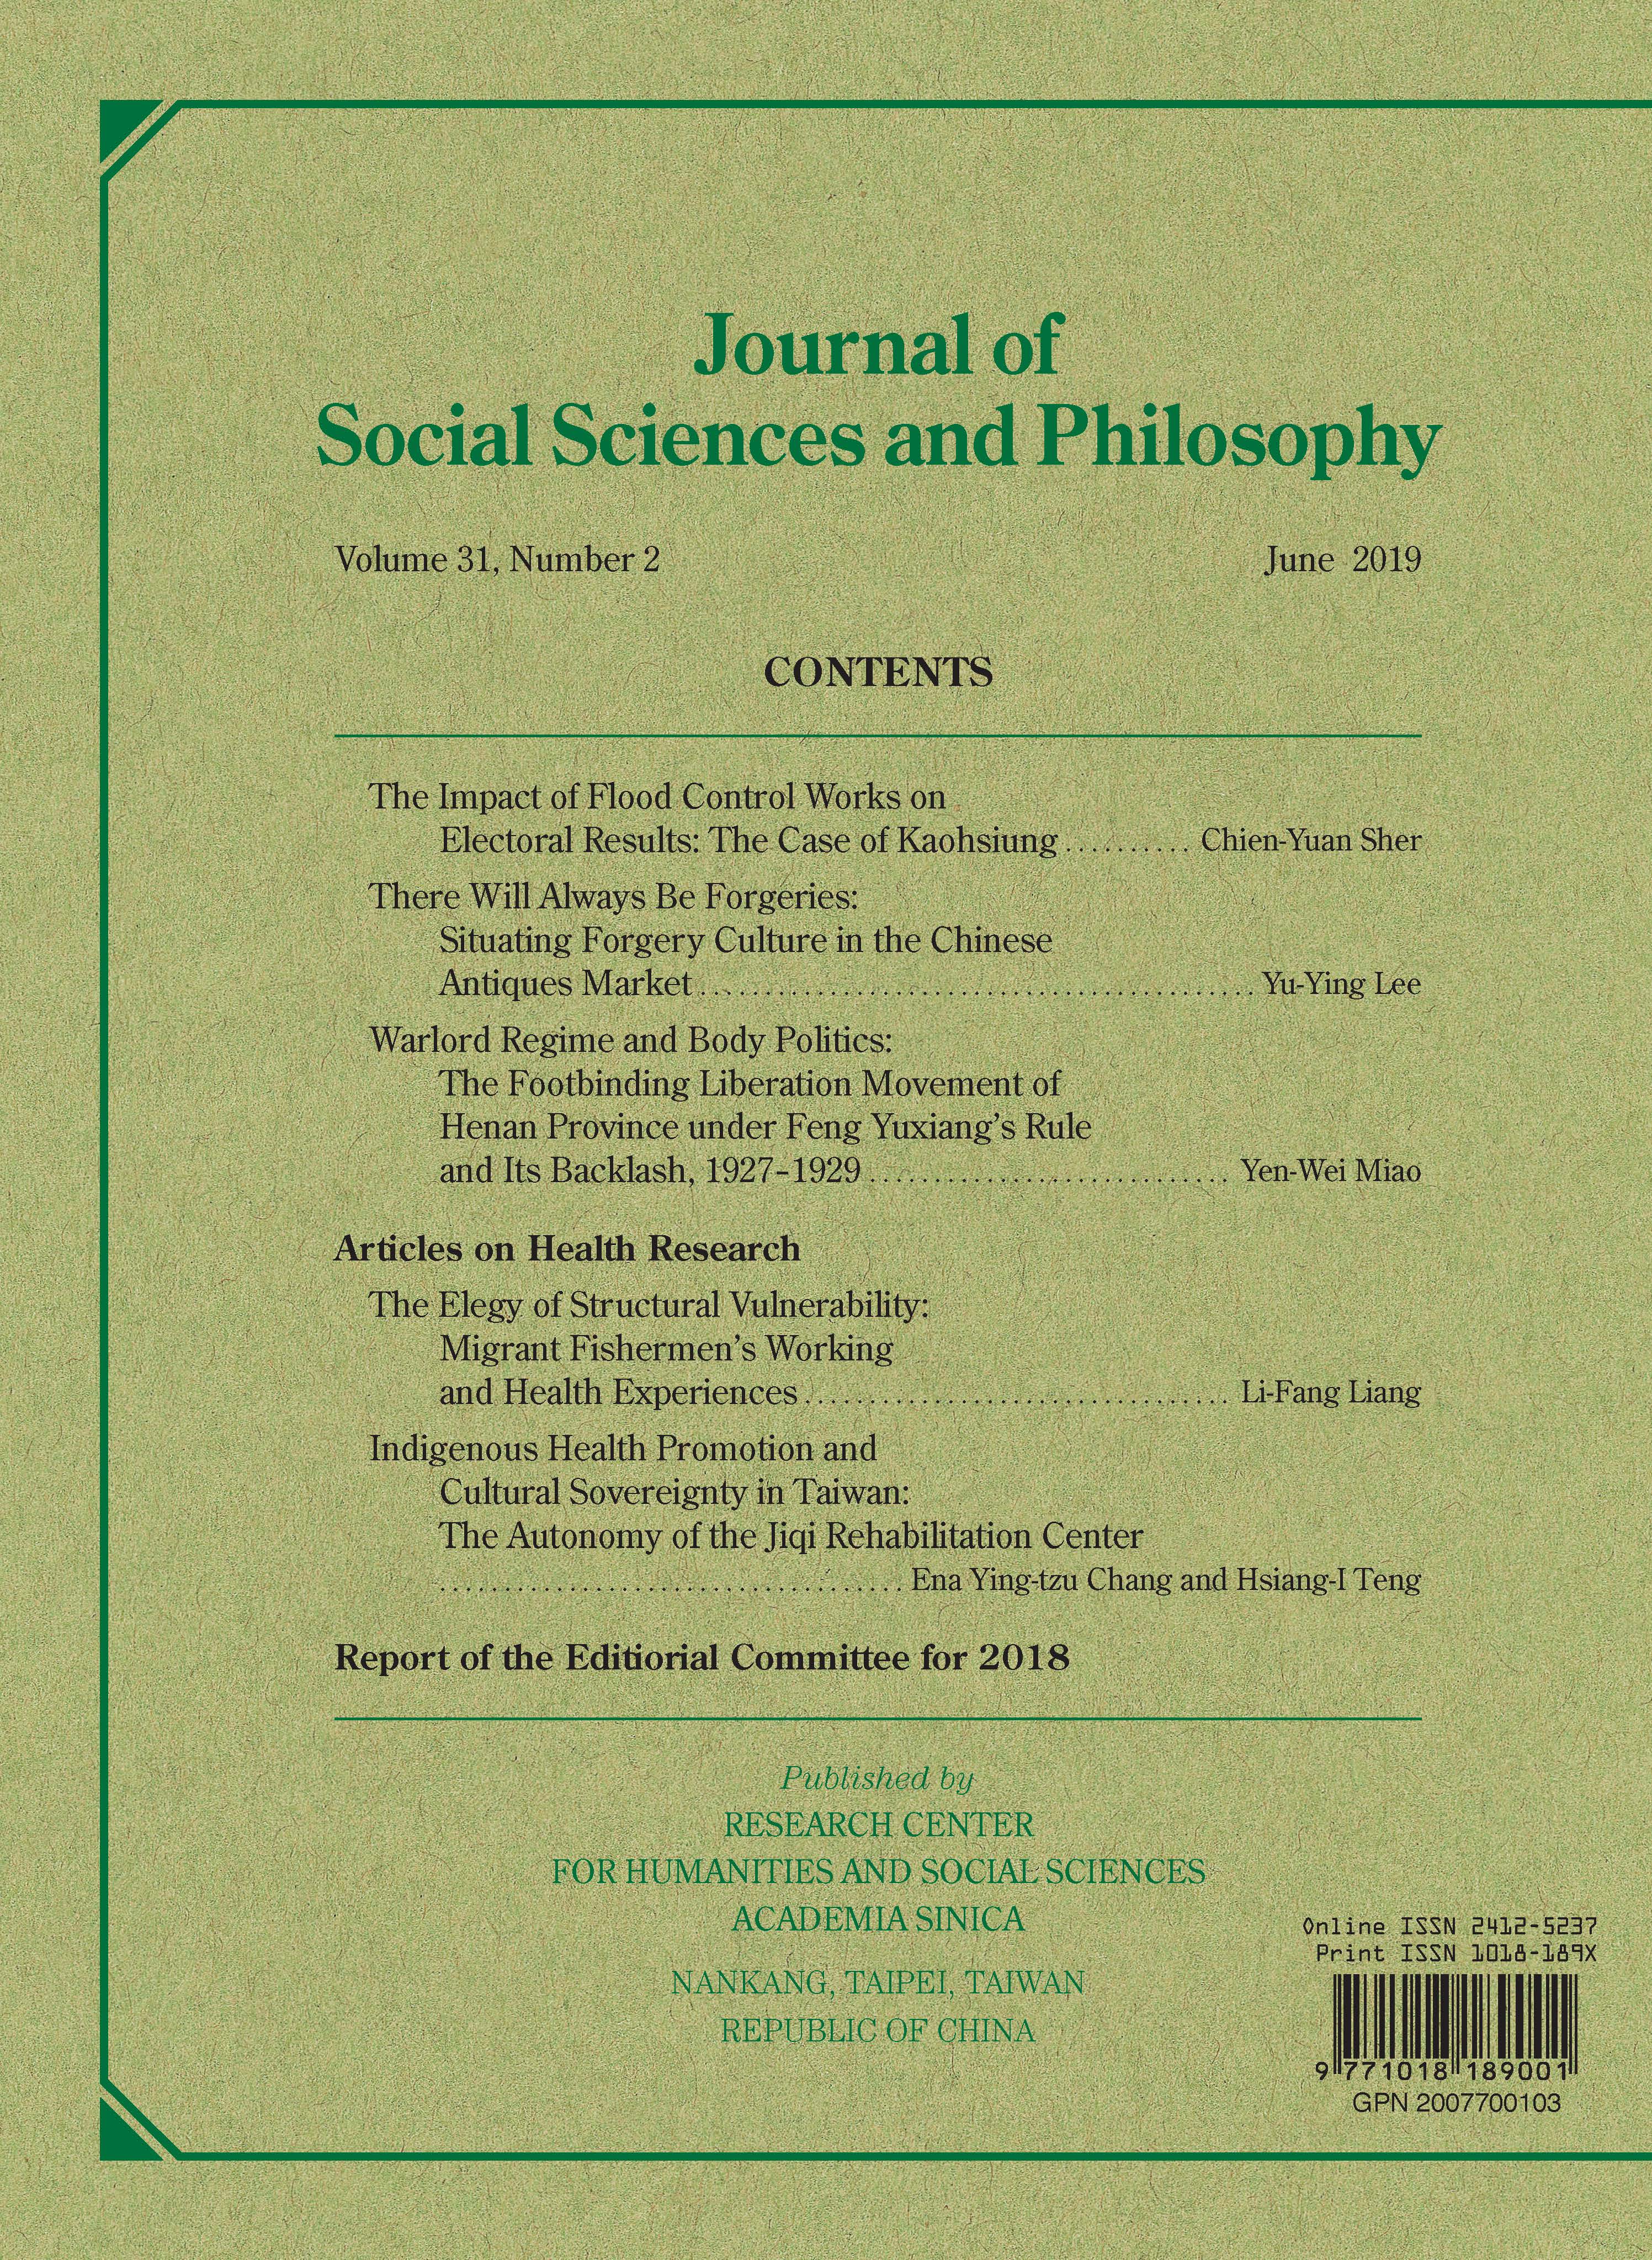 Journal of Social Sciences and Philosophy (Vol.31, No.2) has just been published